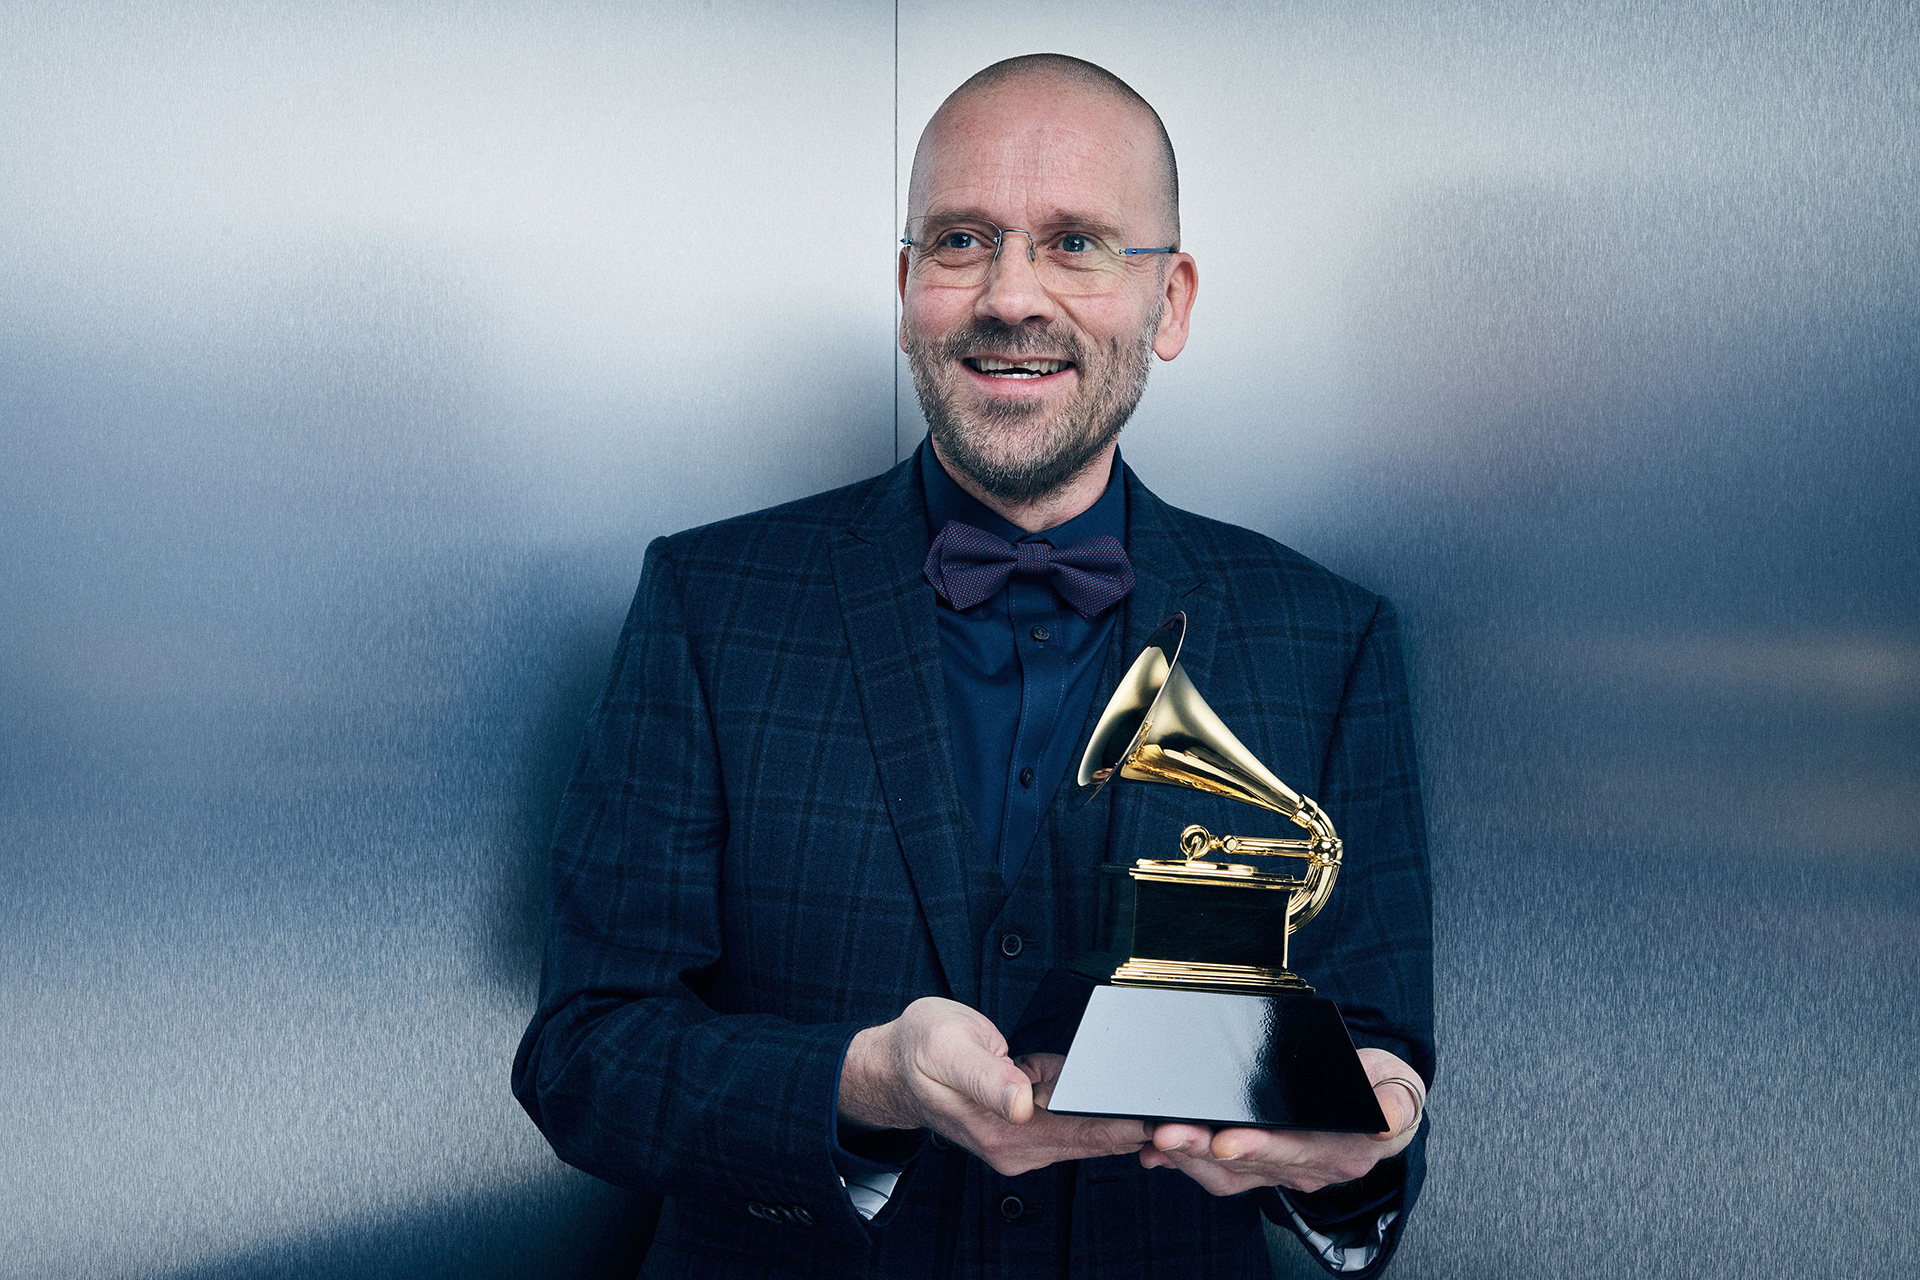 Lindberg Lyd is the Grammy Award-winning production company with nominations in craft categoriescategories Best Engineered Album, Best Surround Sound Album, Best Immersive Audio Album and Producer of the Year. Produced by Morten Lindberg.